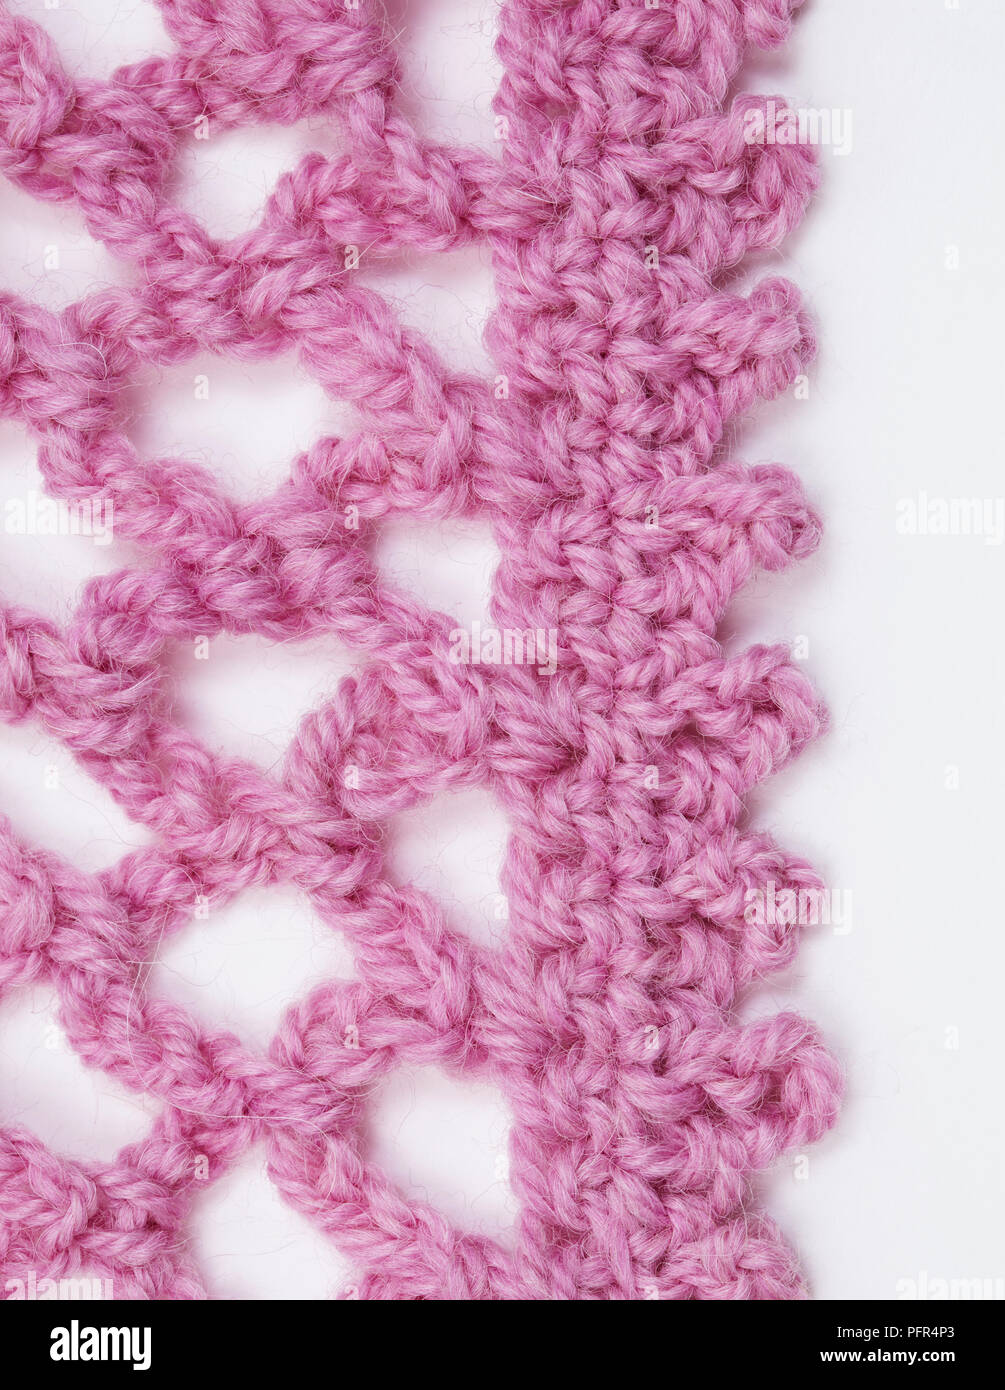 Picot edging detail on crocheted pink shawl Stock Photo